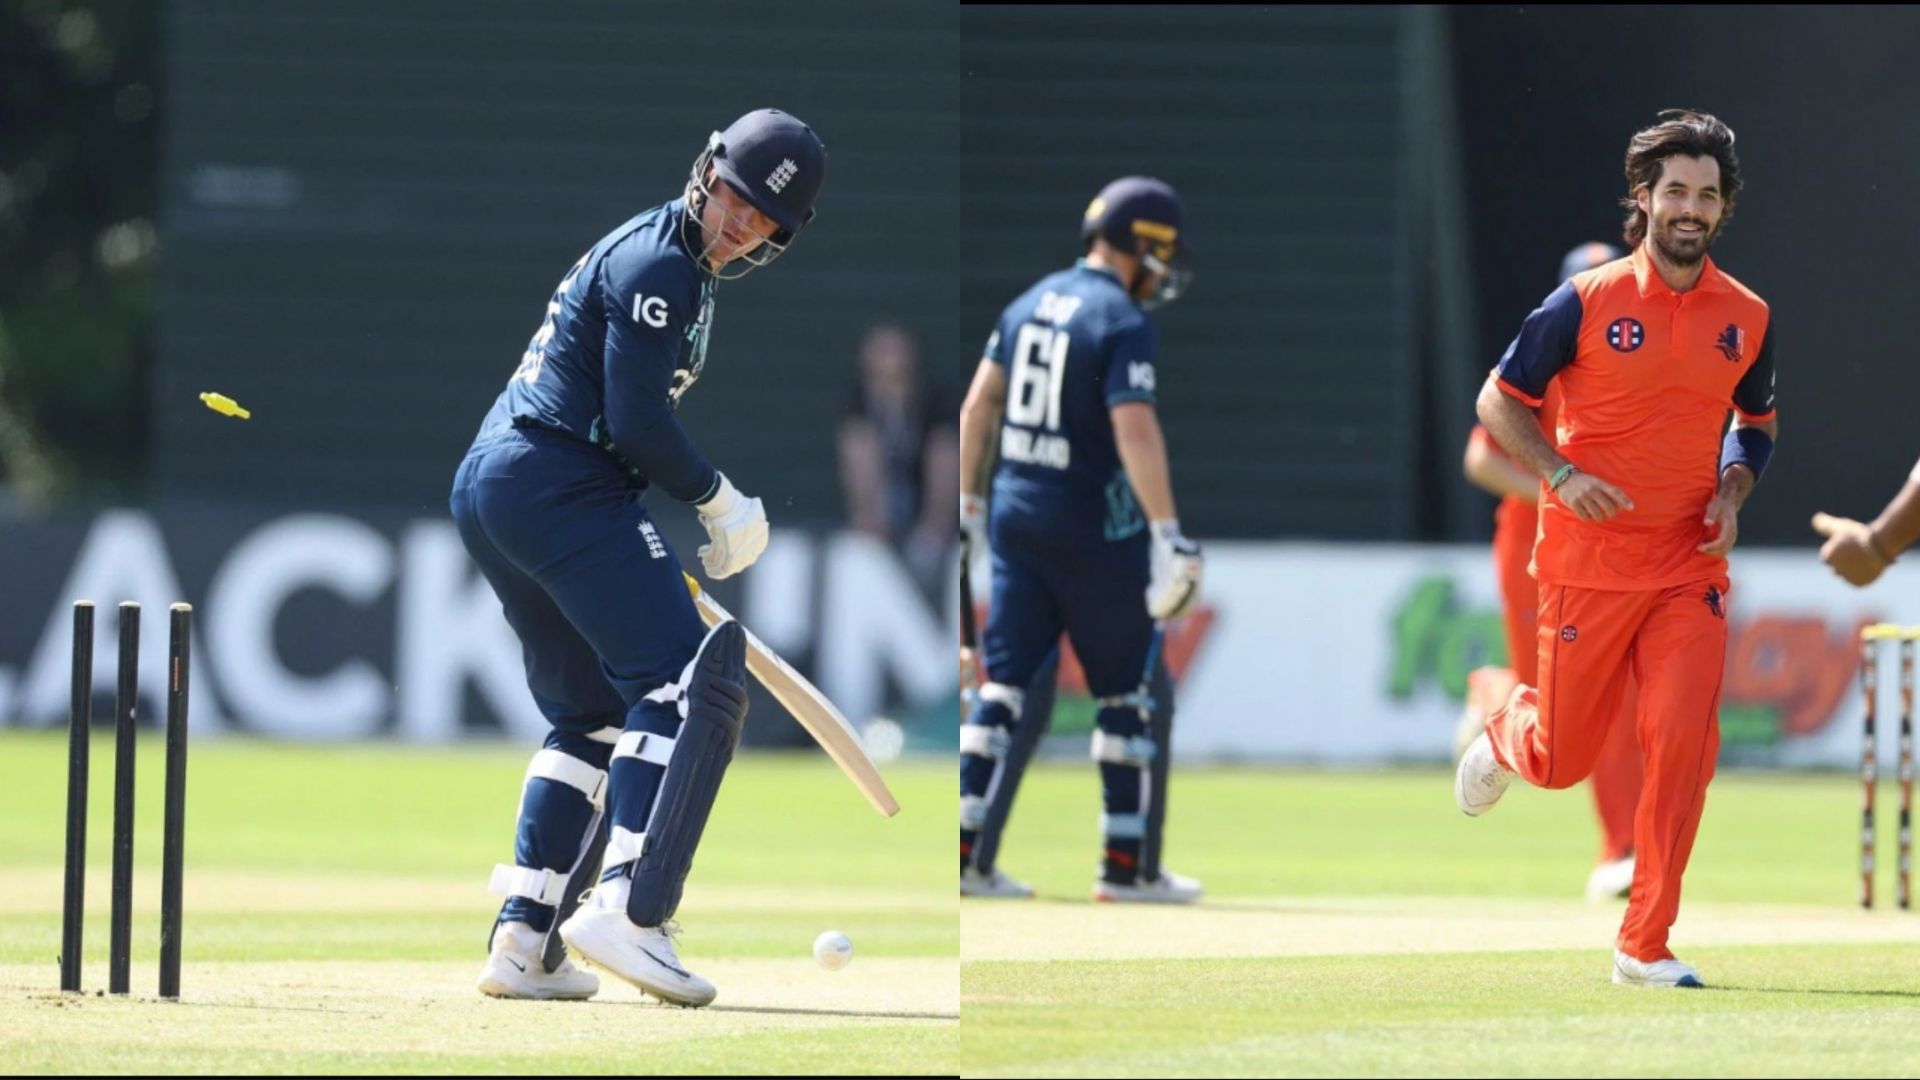 Jason Roy&#039;s cousin brother Shane Snater recently dismissed him in the ICC Cricket World Cup Super League series between England and Netherlands